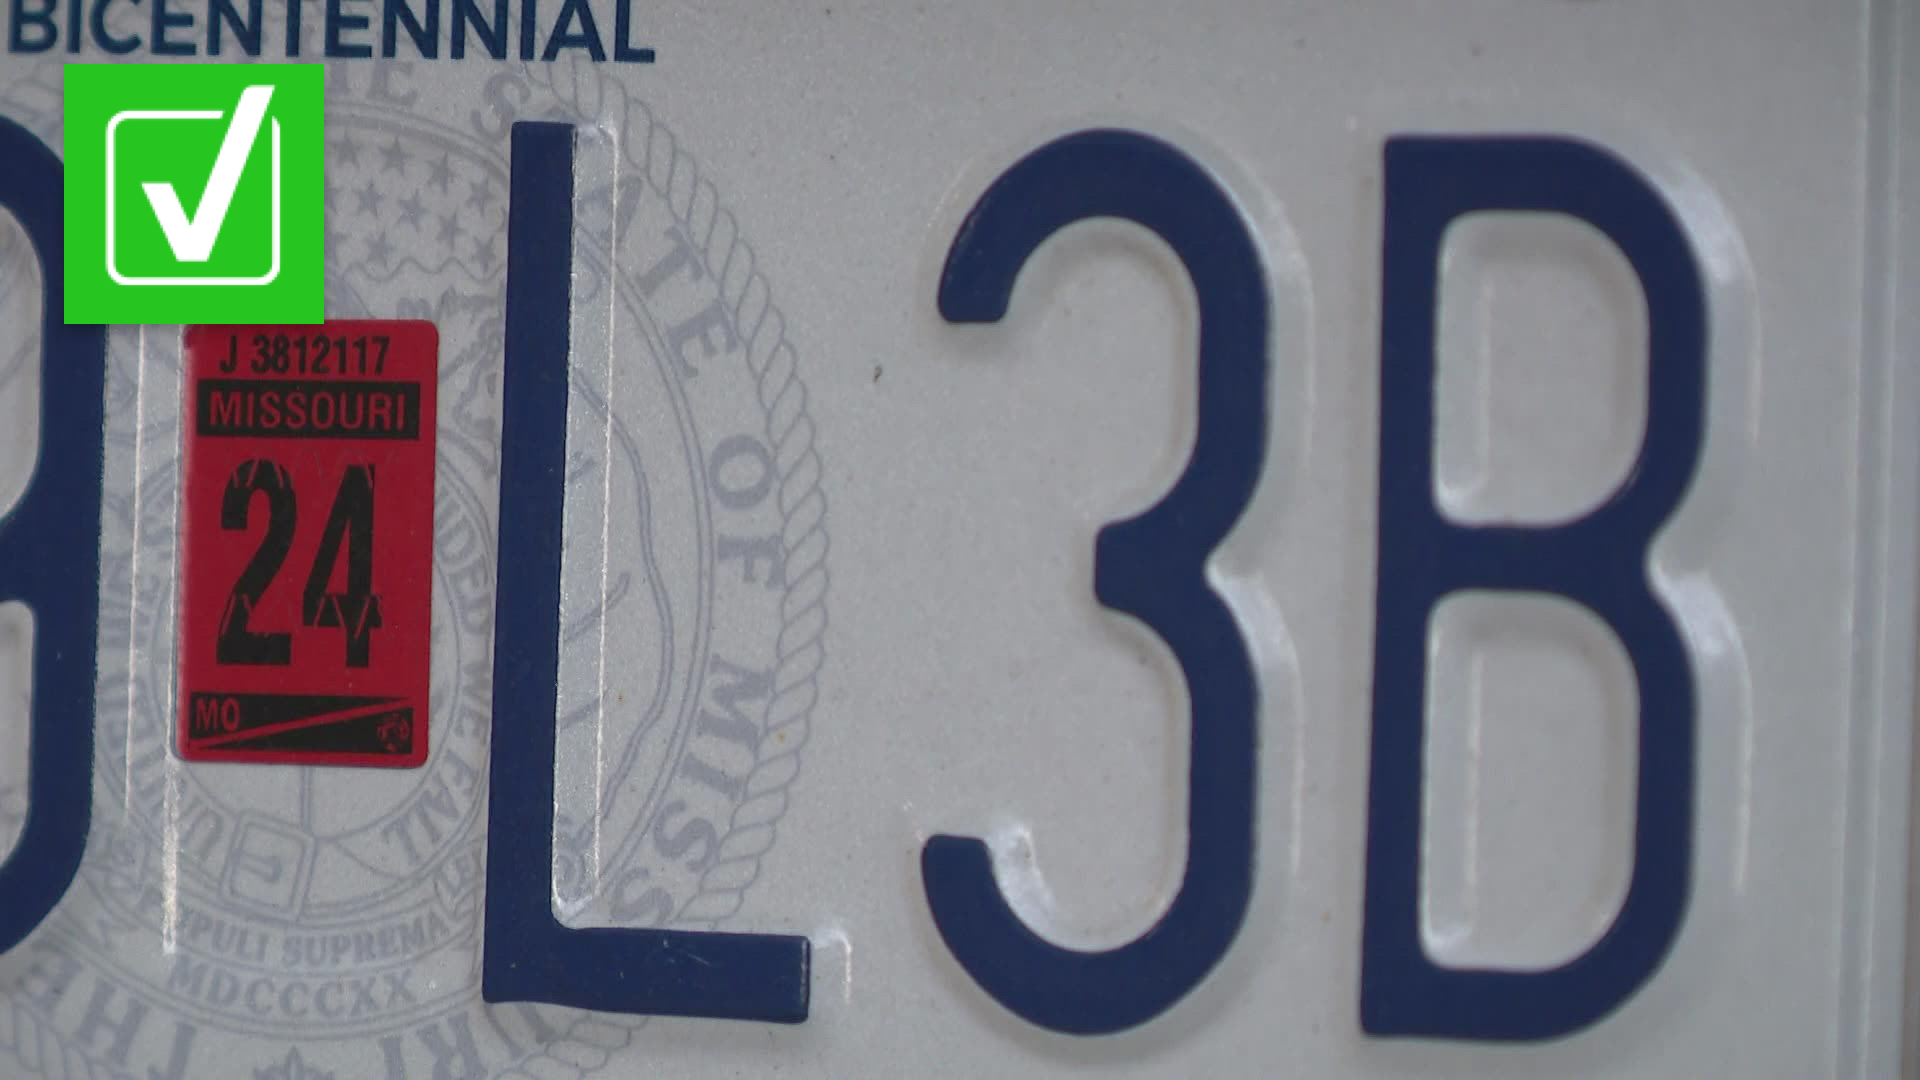 We can Verify in both Missouri and Illinois, the law requires passenger cars have both a front and rear license plate.